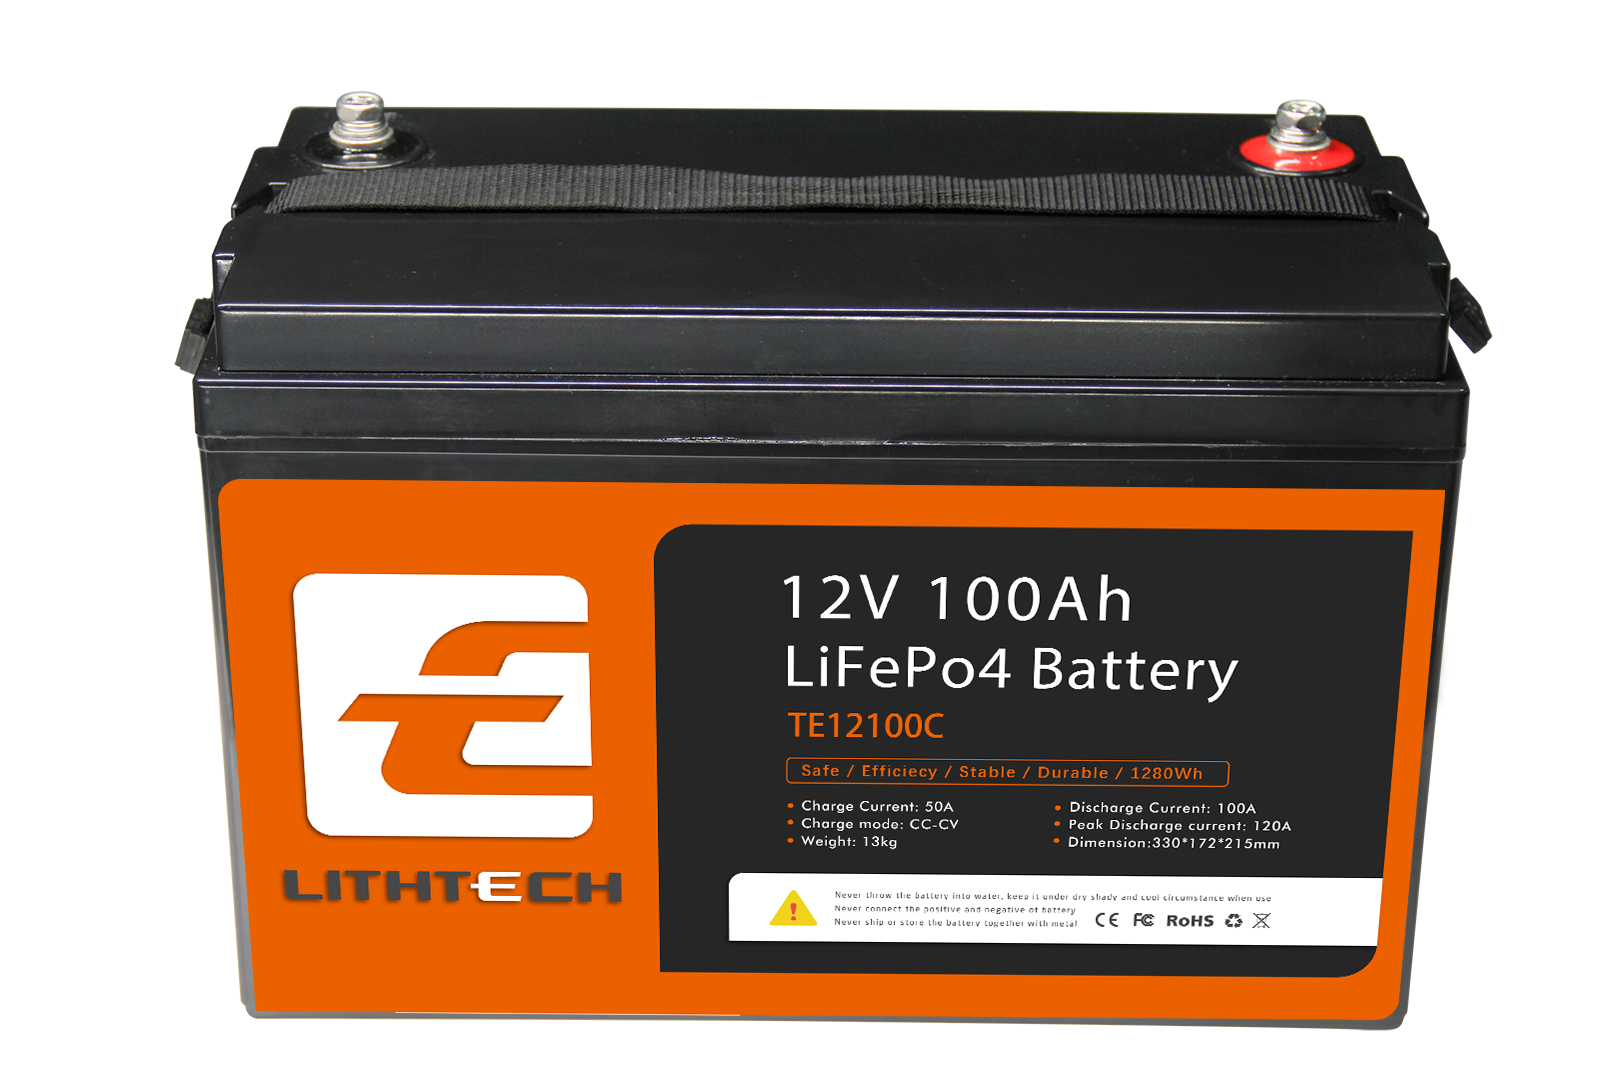 Lithtech TE12100C 32650 Cylindrical Battery Pack 12v 100ah Lithium Ion Batteries